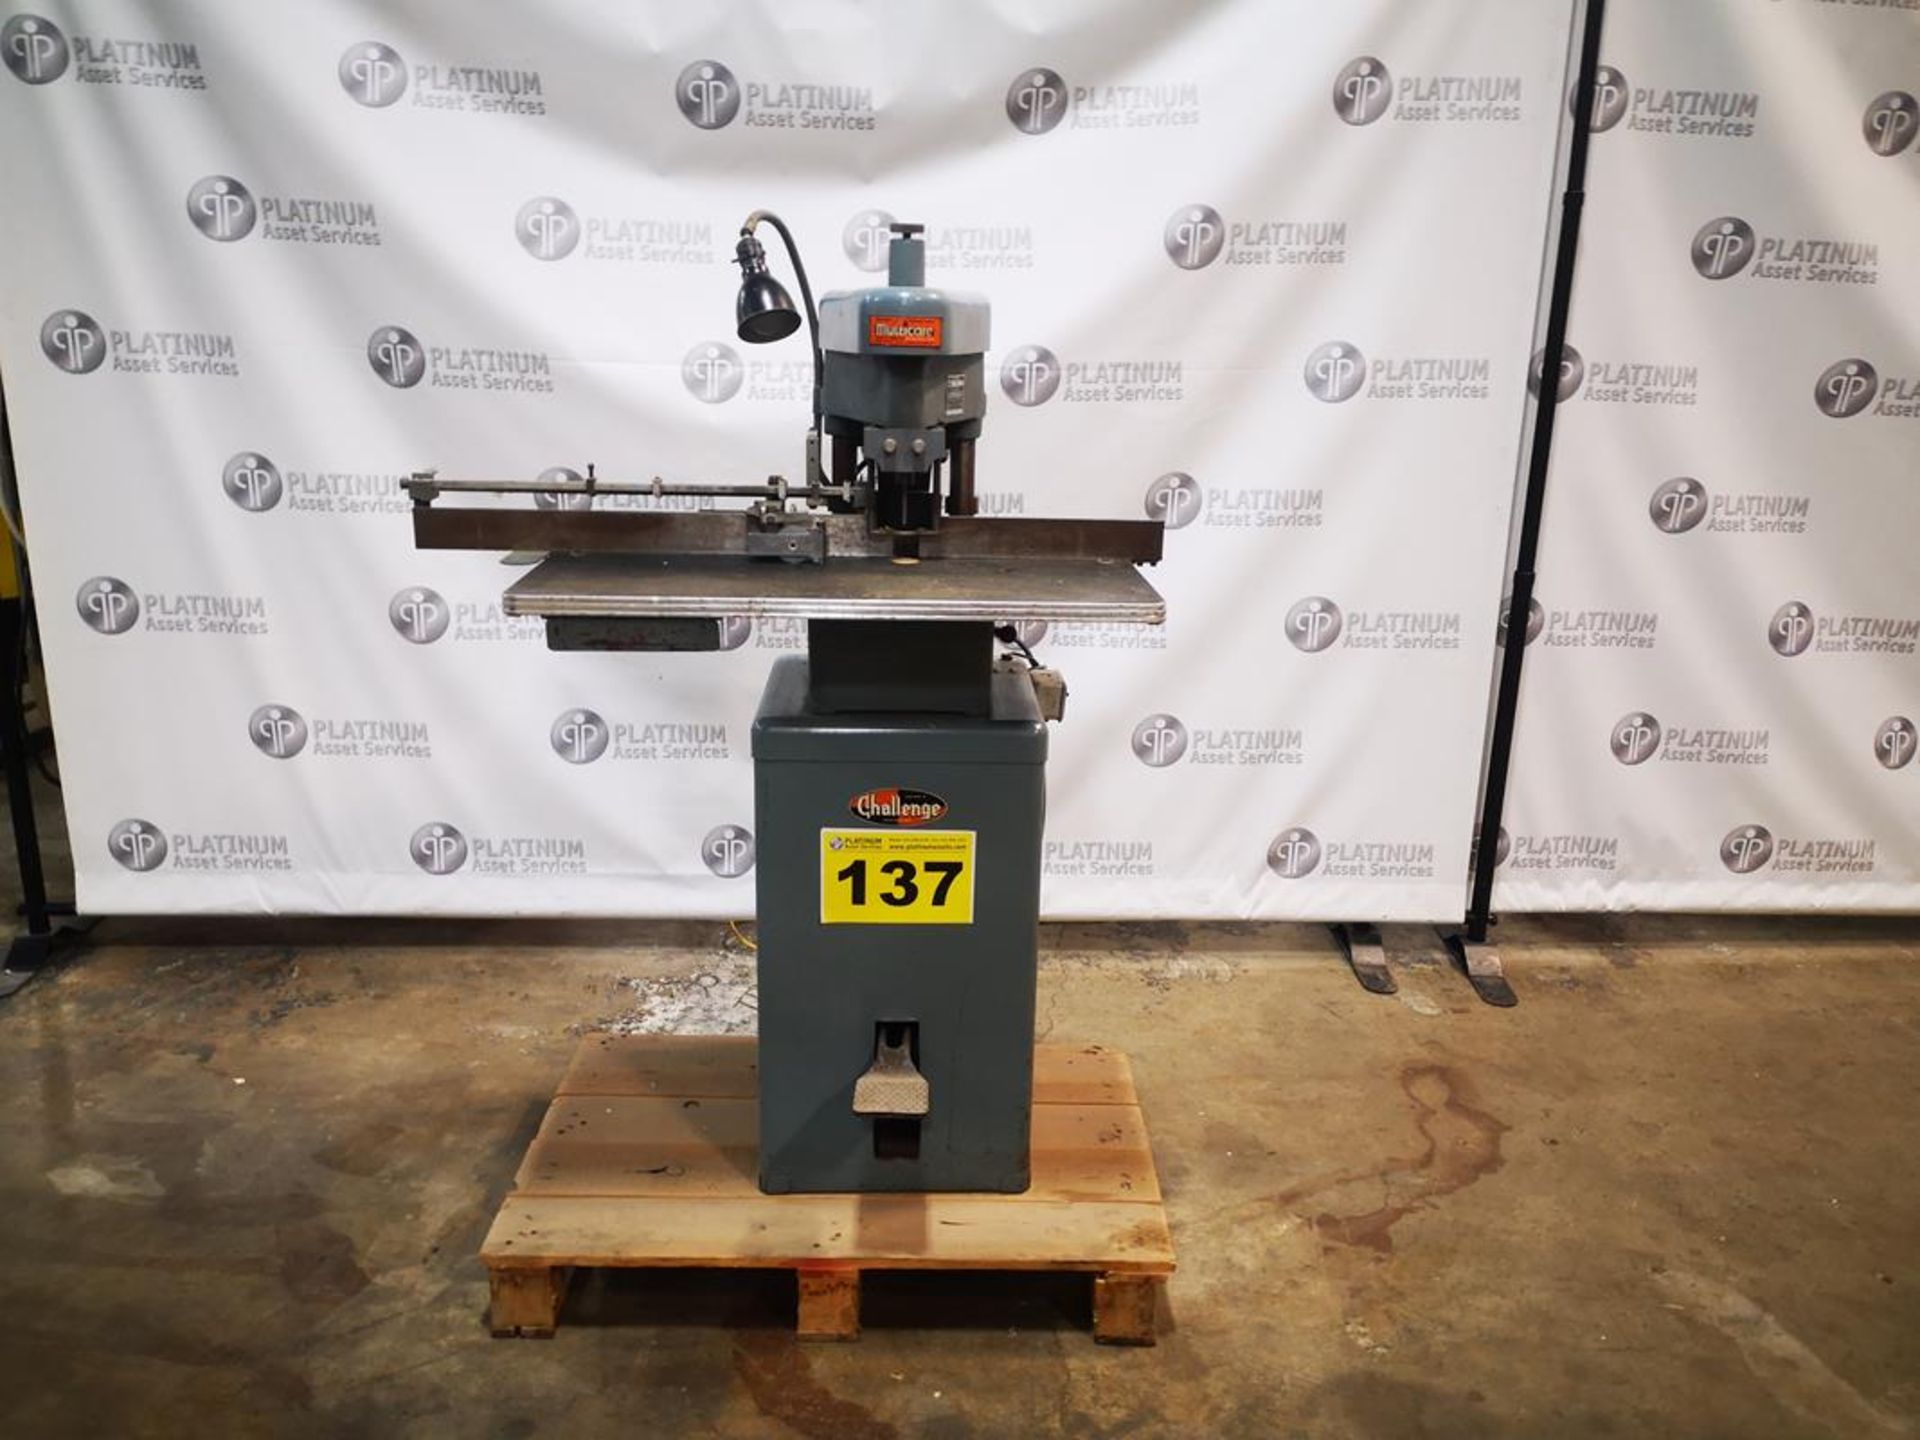 CHALLENGE, E, SINGLE HEAD PAPER DRILL, E 32" X 18" TABLE, 0" TO 5.5" BACK GAGE, 5 POSITION CARD - Image 2 of 6